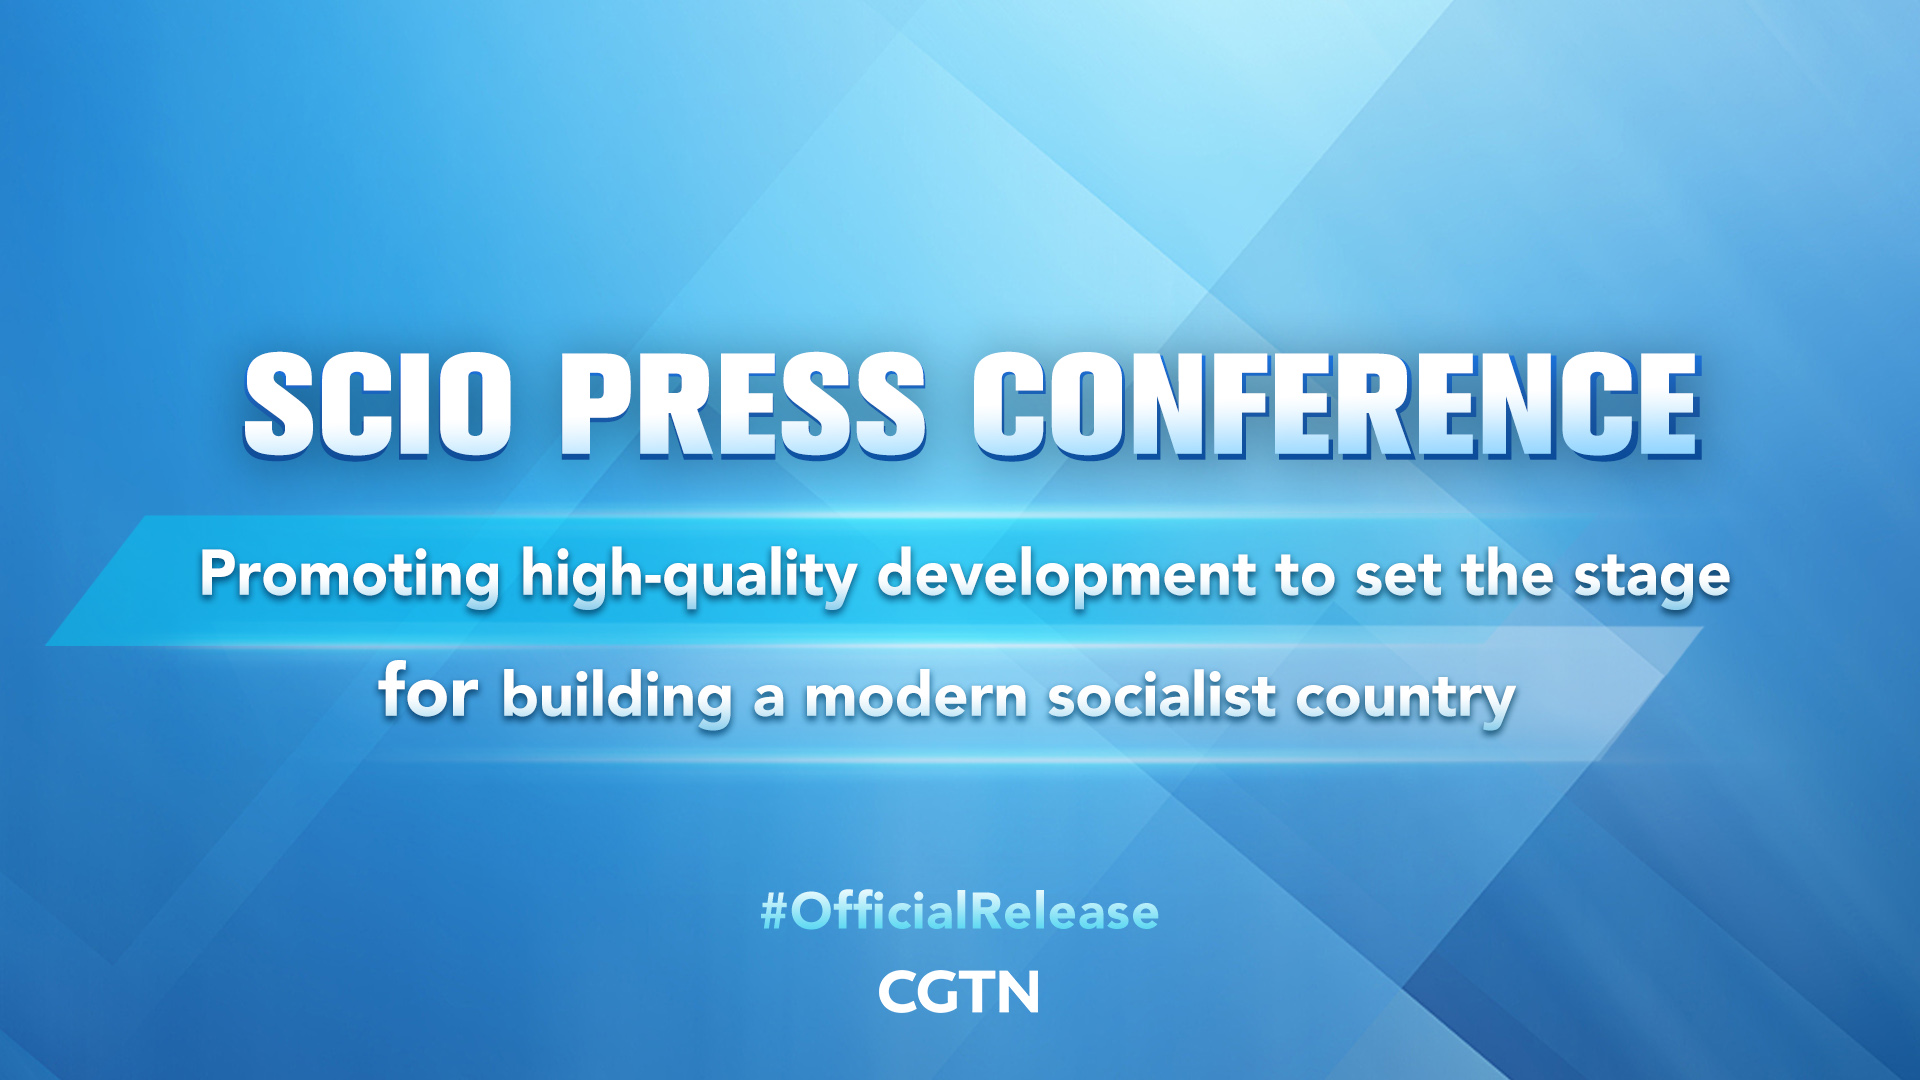 Live: SCIO briefs on promoting high-quality development to build a modern socialist country